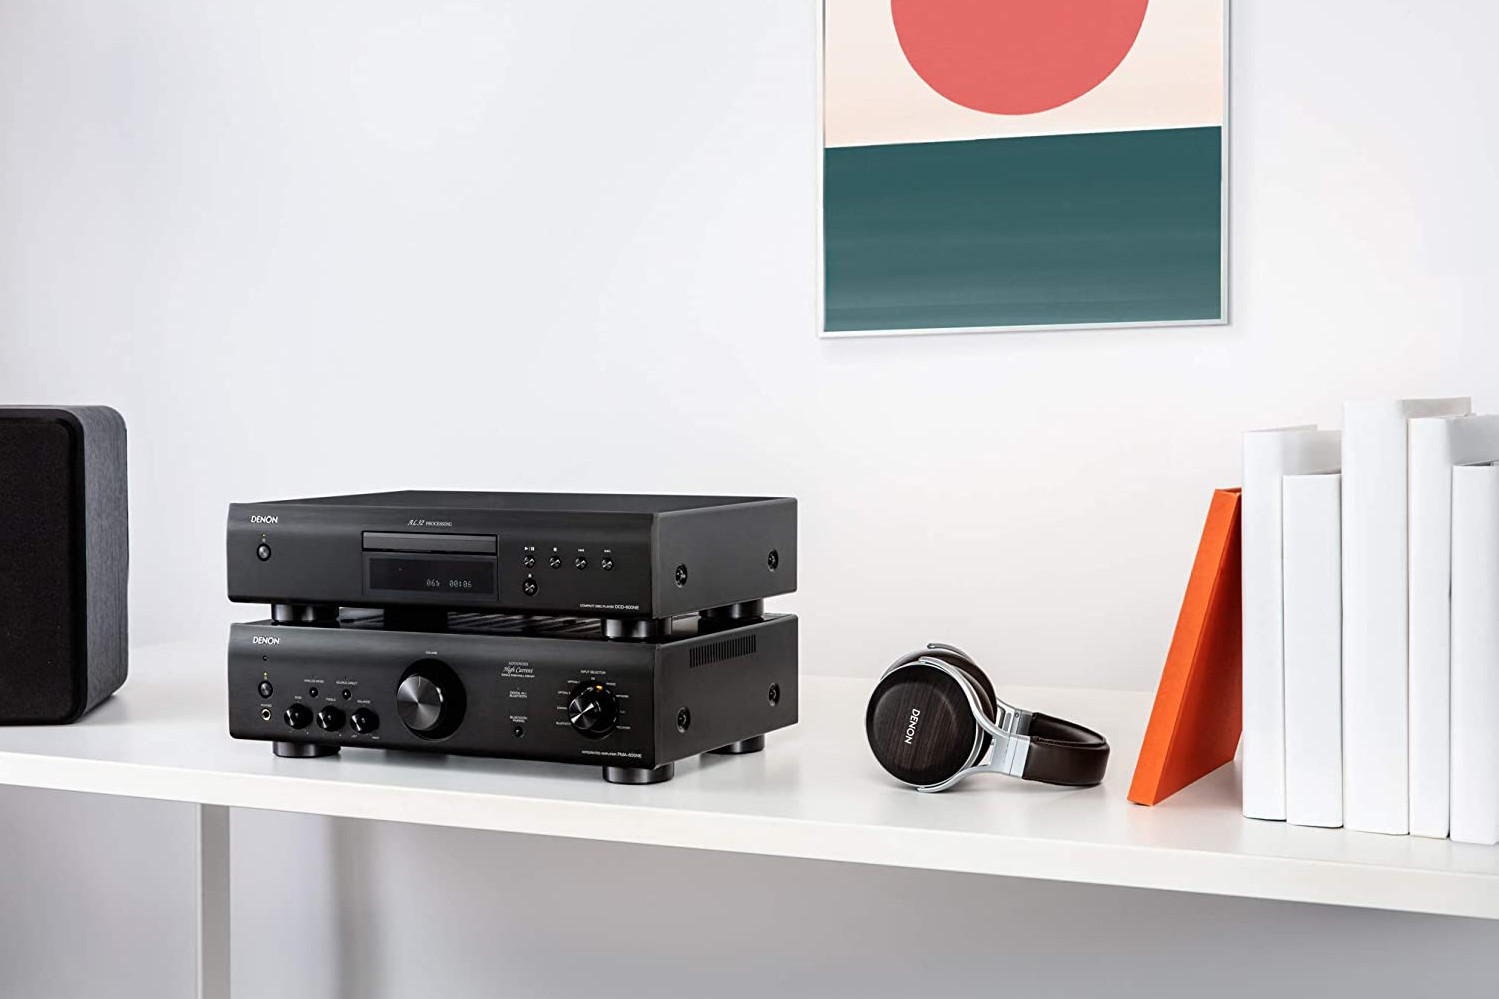 Q&A: What Are The Best Features To Look For In A Hi-Fi System?